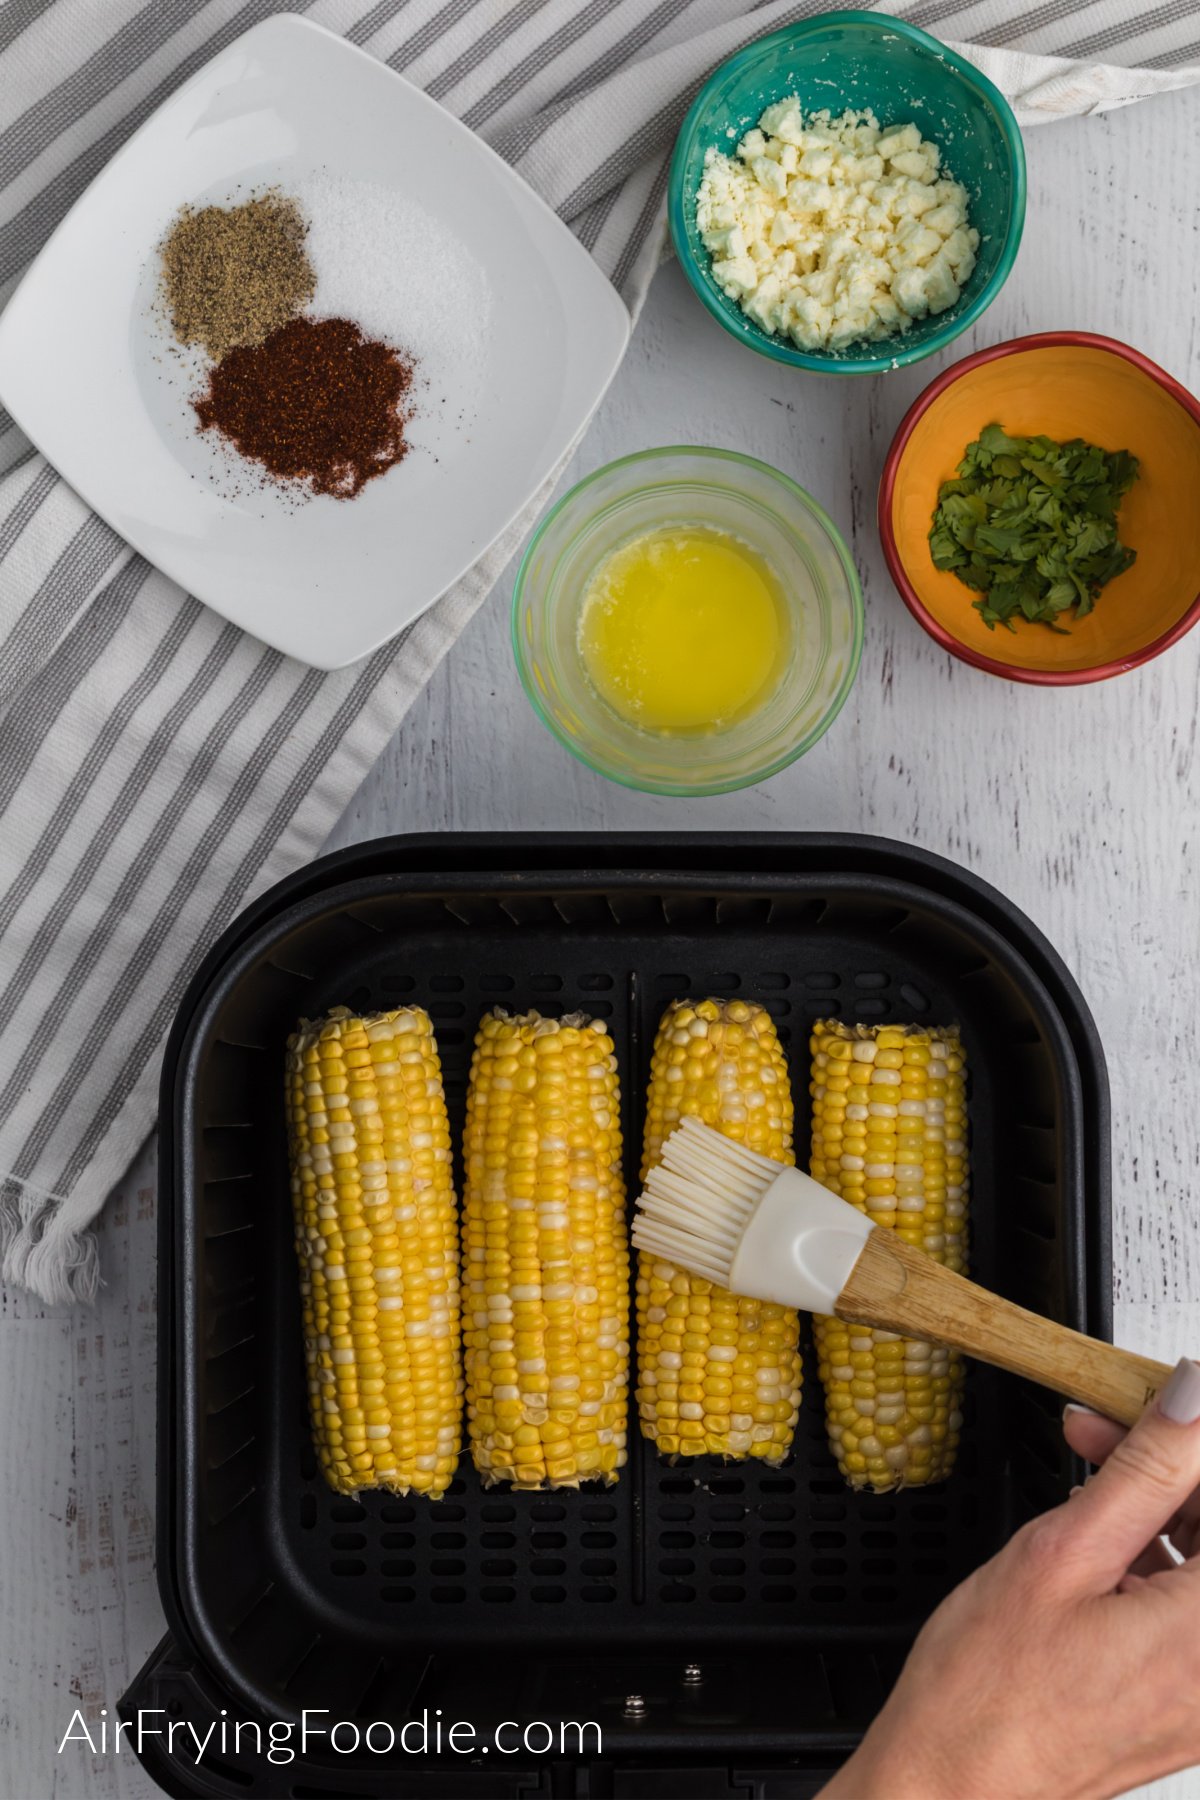 Brushing butter onto the corn in the air fryer basket.